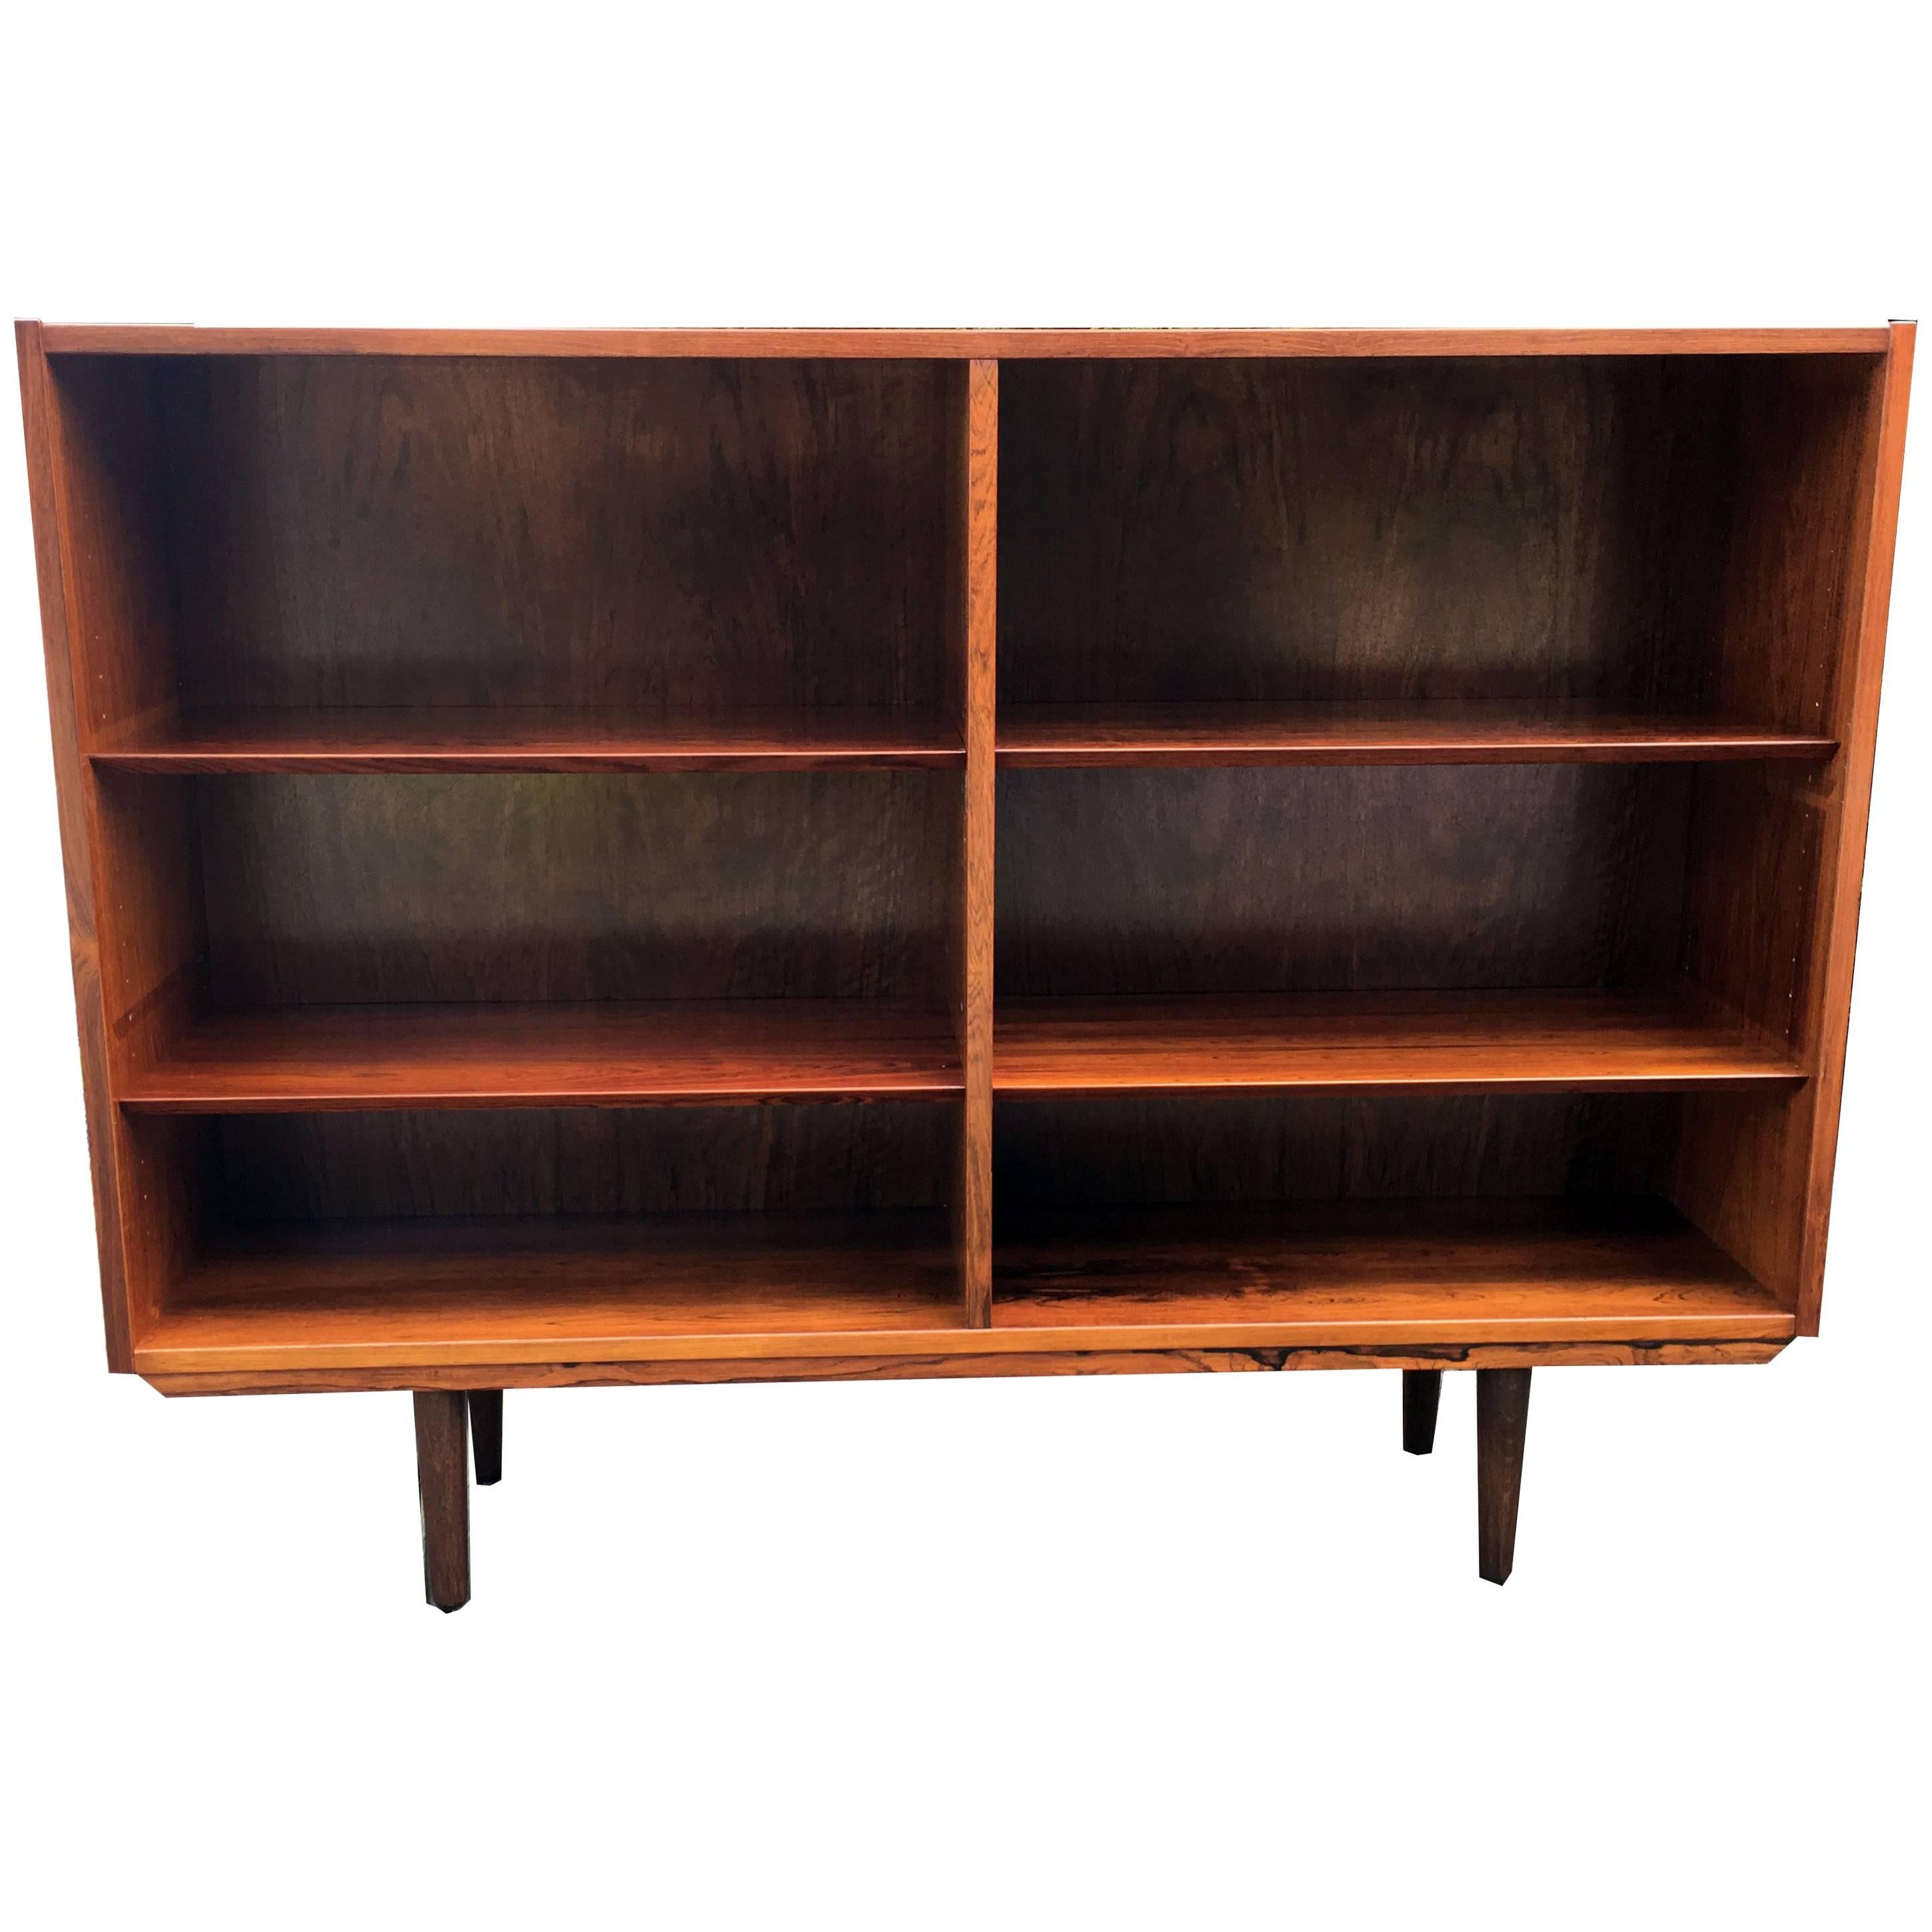 Danish Open Bookcase with Adjustable Shelves Probably by Poul Hundevad